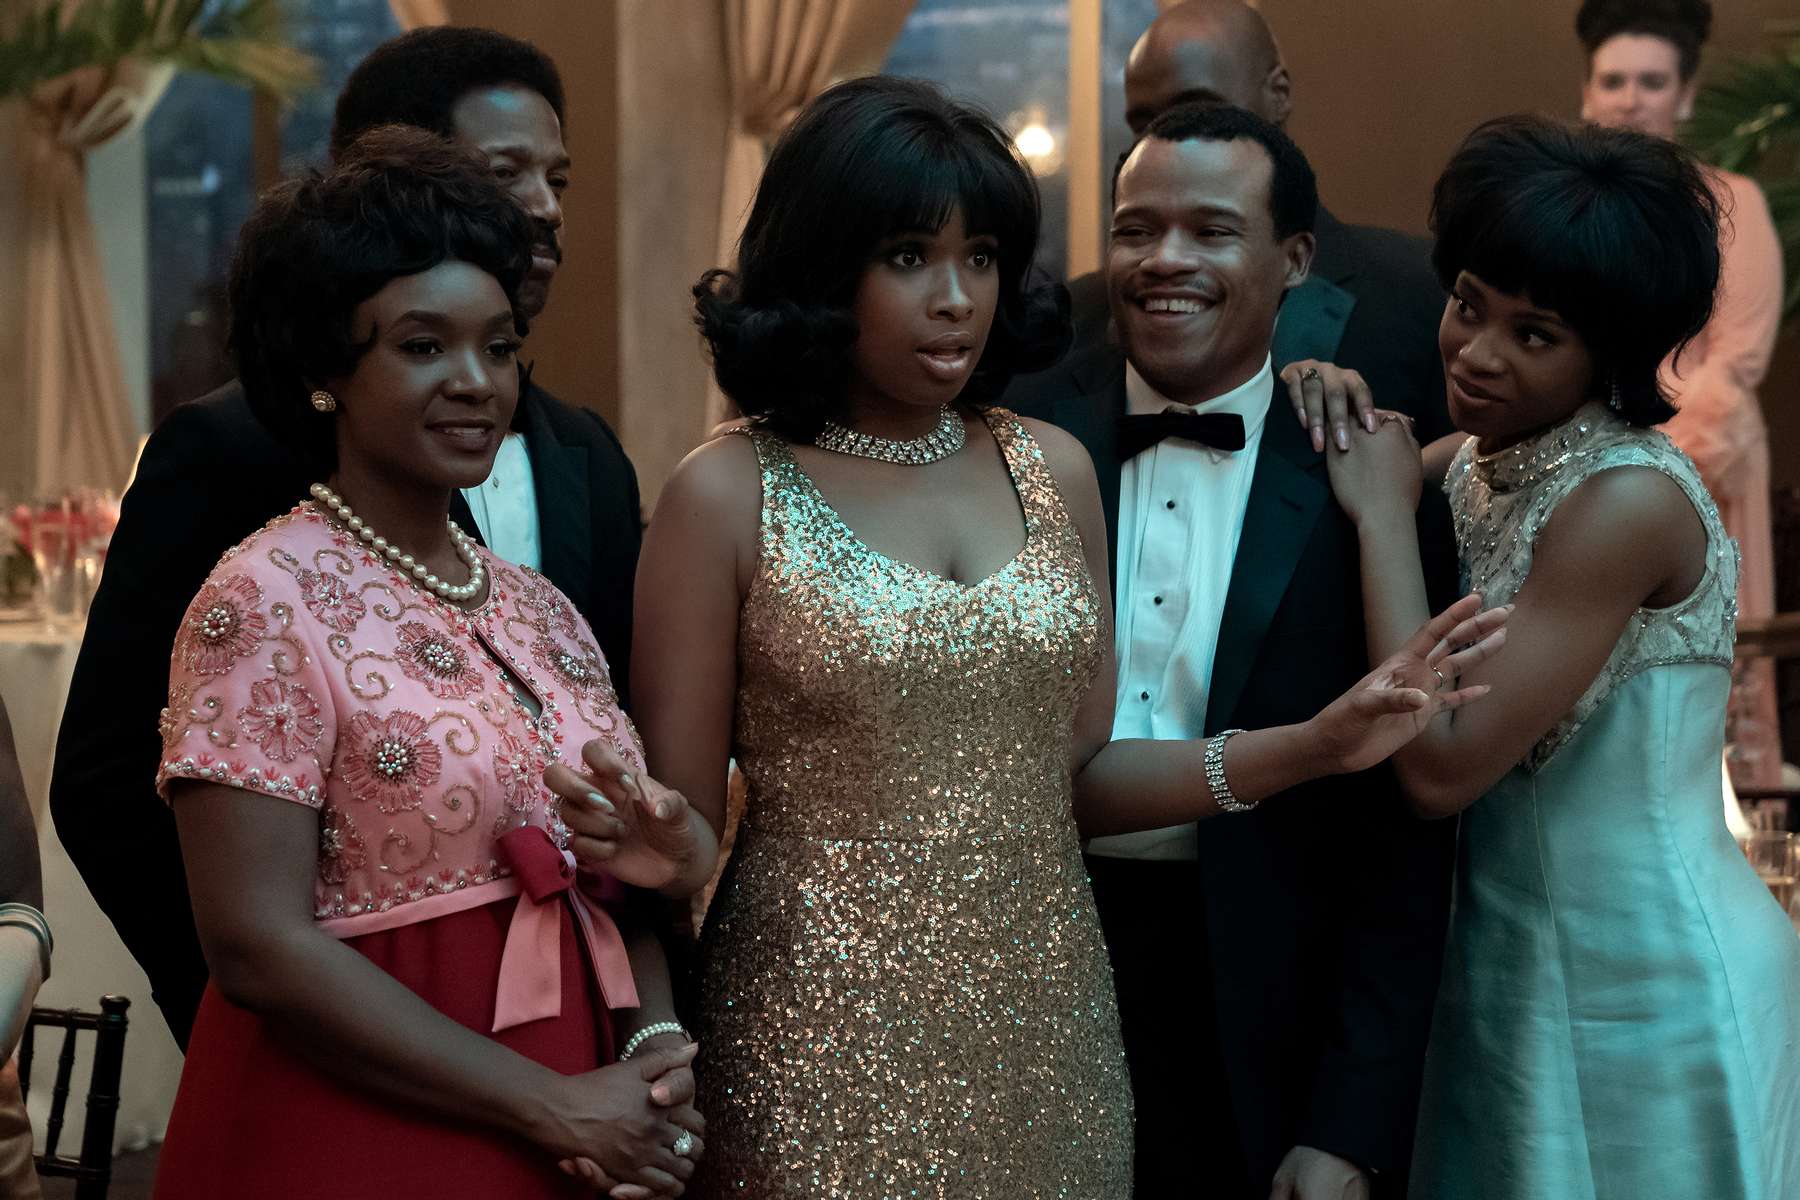  R_19272_RC(l-r.) Saycon Sengbloh stars as Erma Franklin, Marlon Wayans as Ted White, Jennifer Hudson as Aretha Franklin, LeRoy McClain as Cecil Franklin and Hailey Kilgore as Carolyn Franklin inRESPECT, A Metro Goldwyn Mayer Pictures filmPhoto credit: Quantrell D. Colbert